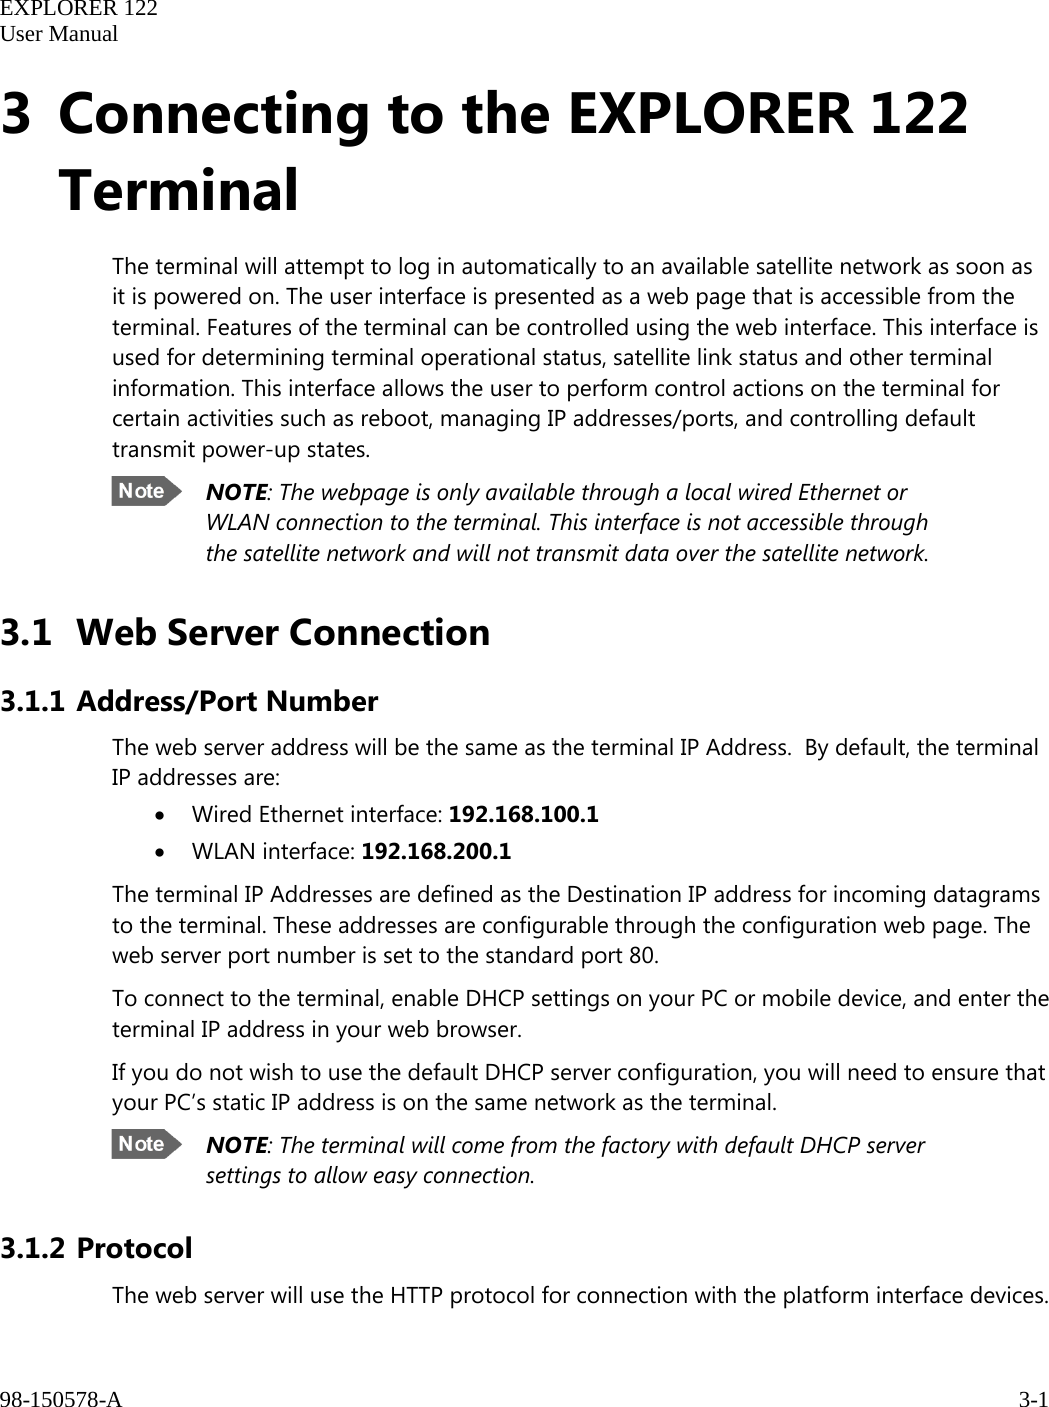   EXPLORER 122  User Manual  98-150578-A     3-1   3 Connecting to the EXPLORER 122 Terminal The terminal will attempt to log in automatically to an available satellite network as soon as it is powered on. The user interface is presented as a web page that is accessible from the terminal. Features of the terminal can be controlled using the web interface. This interface is used for determining terminal operational status, satellite link status and other terminal information. This interface allows the user to perform control actions on the terminal for certain activities such as reboot, managing IP addresses/ports, and controlling default transmit power-up states.  NOTE: The webpage is only available through a local wired Ethernet or WLAN connection to the terminal. This interface is not accessible through the satellite network and will not transmit data over the satellite network.   3.1 Web Server Connection 3.1.1 Address/Port Number The web server address will be the same as the terminal IP Address.  By default, the terminal IP addresses are: • Wired Ethernet interface: 192.168.100.1 • WLAN interface: 192.168.200.1 The terminal IP Addresses are defined as the Destination IP address for incoming datagrams to the terminal. These addresses are configurable through the configuration web page. The web server port number is set to the standard port 80. To connect to the terminal, enable DHCP settings on your PC or mobile device, and enter the terminal IP address in your web browser.  If you do not wish to use the default DHCP server configuration, you will need to ensure that your PC’s static IP address is on the same network as the terminal.  NOTE: The terminal will come from the factory with default DHCP server settings to allow easy connection. 3.1.2 Protocol The web server will use the HTTP protocol for connection with the platform interface devices. 